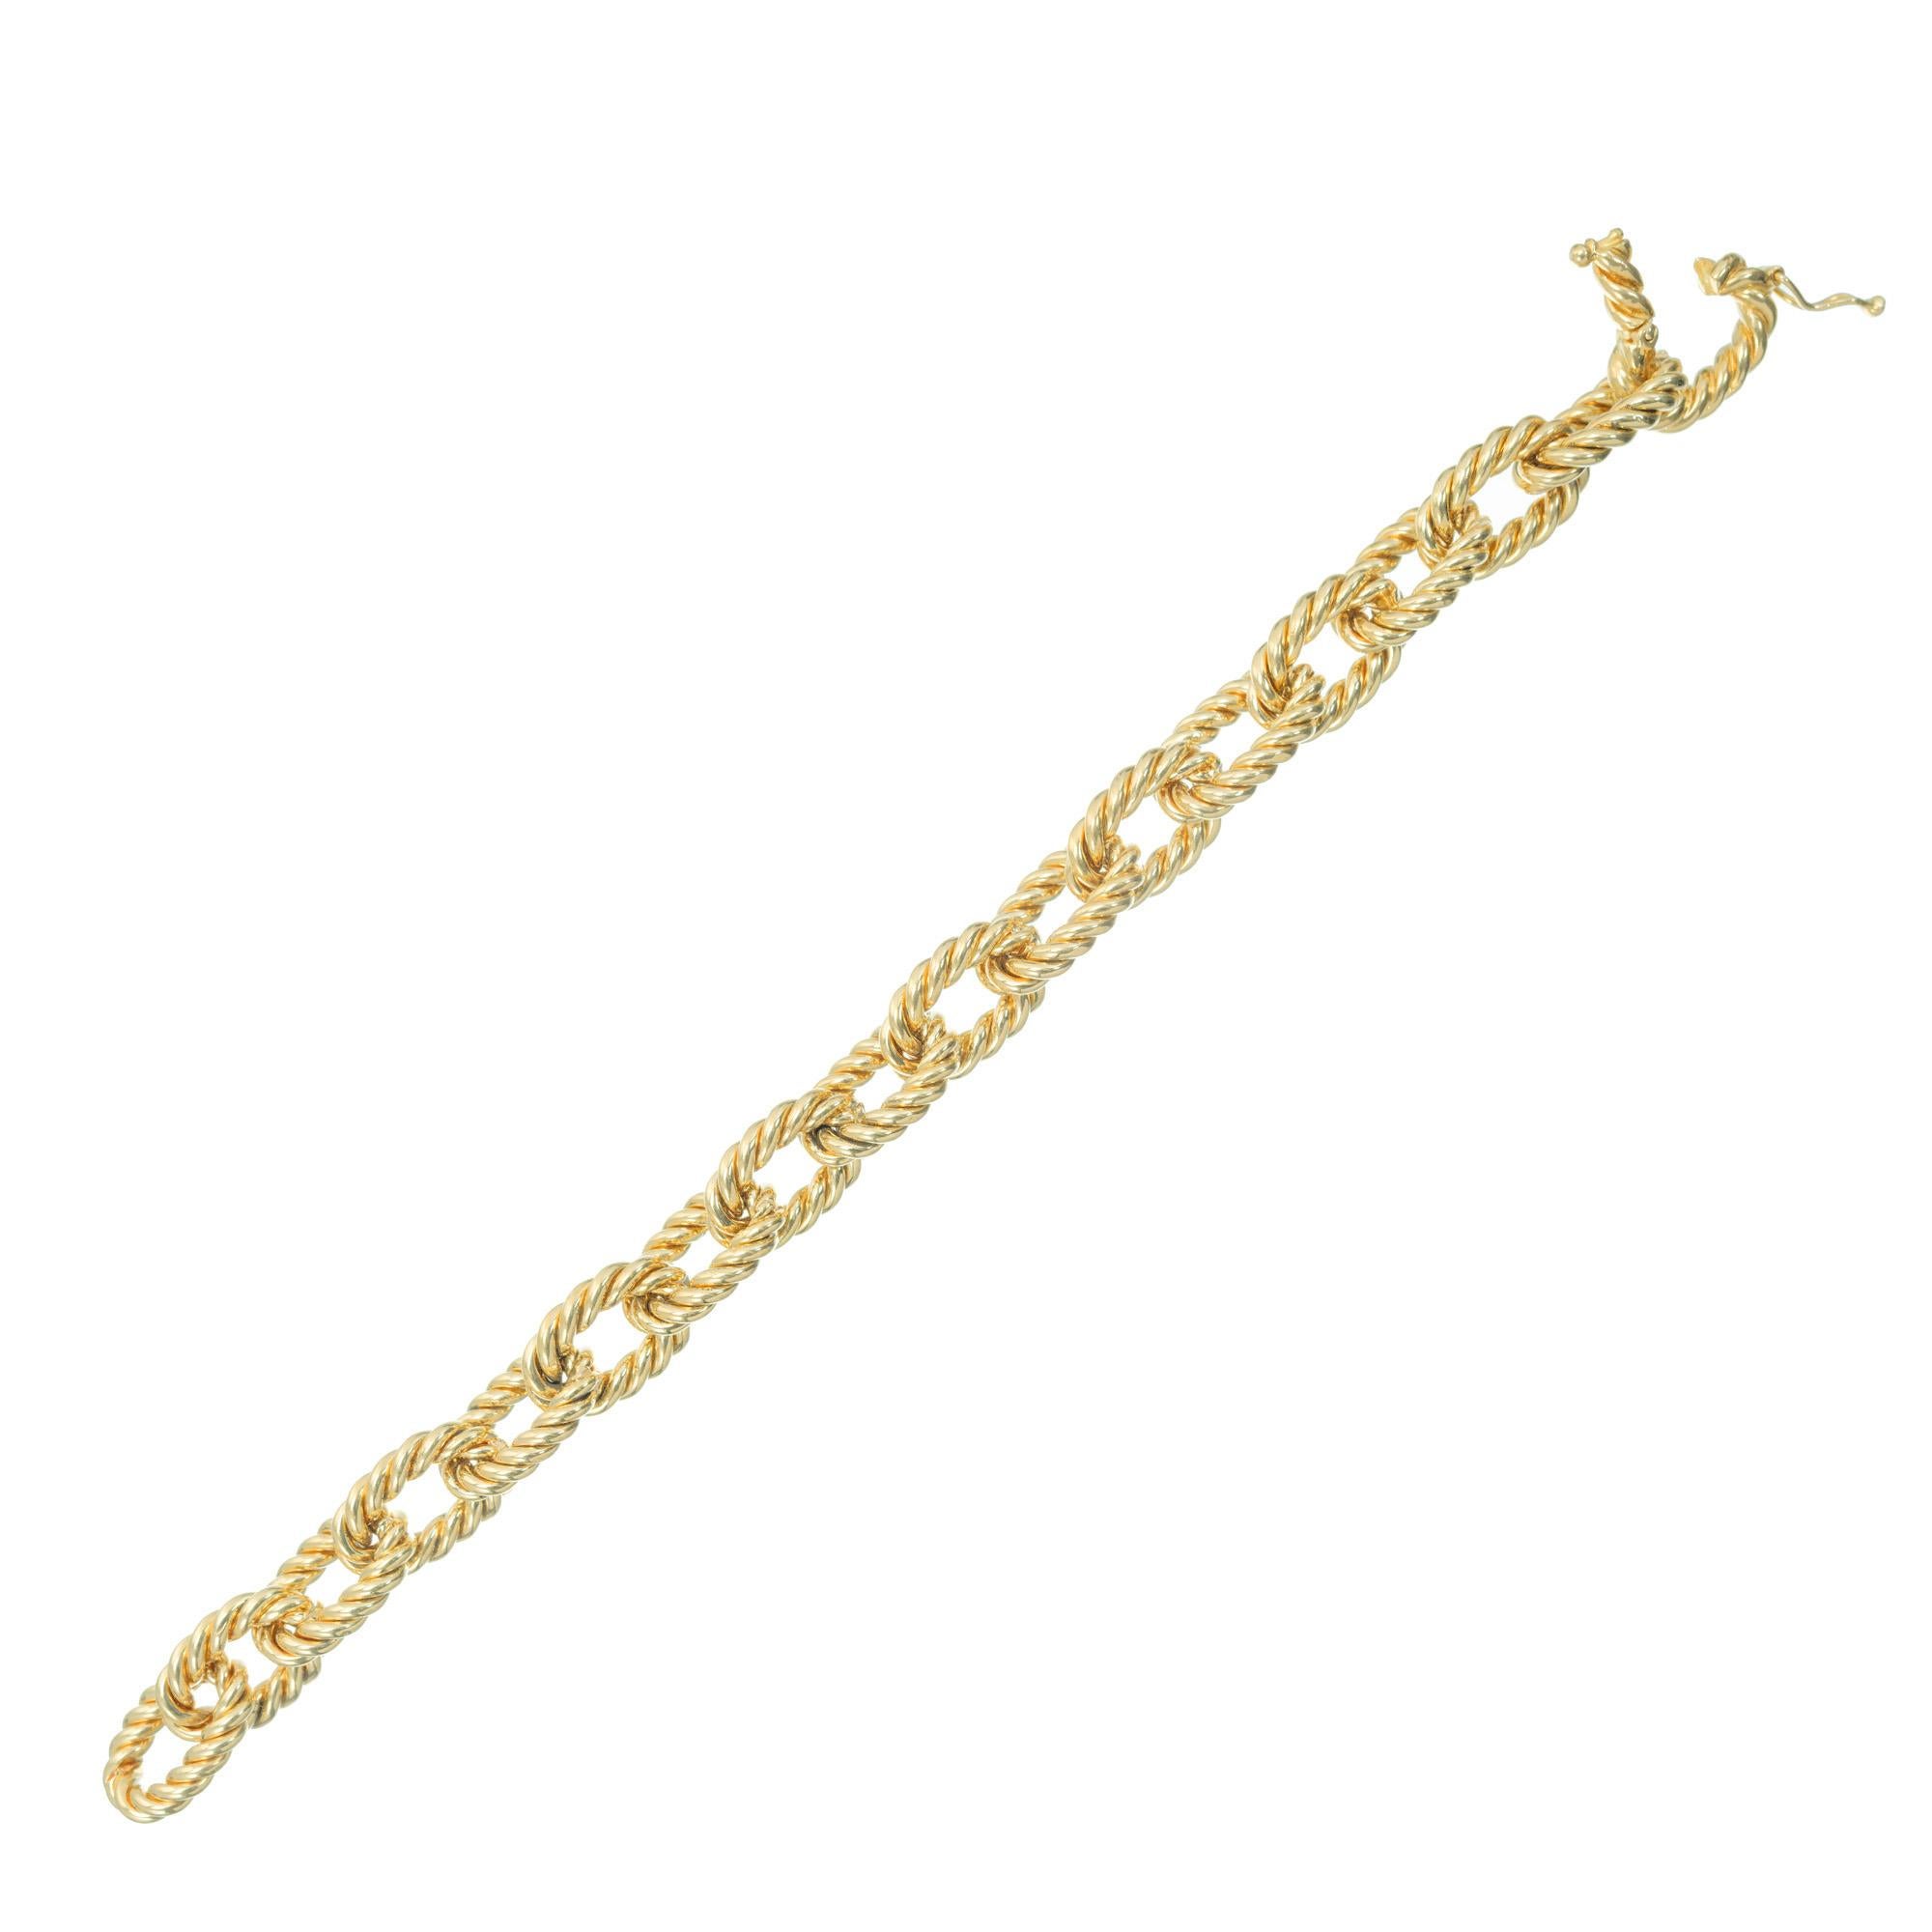 Asprey 8 Inch solid 18k yellow gold twisted link bracelet with built in hidden catch

18k yellow gold 
Stamped: 18k
Hallmark: Asprey 
71.9 grams
Bracelet: 8 Inches
Total length: 8 Inches
Width: 11.45mm
Thickness/depth: 3.3mm
